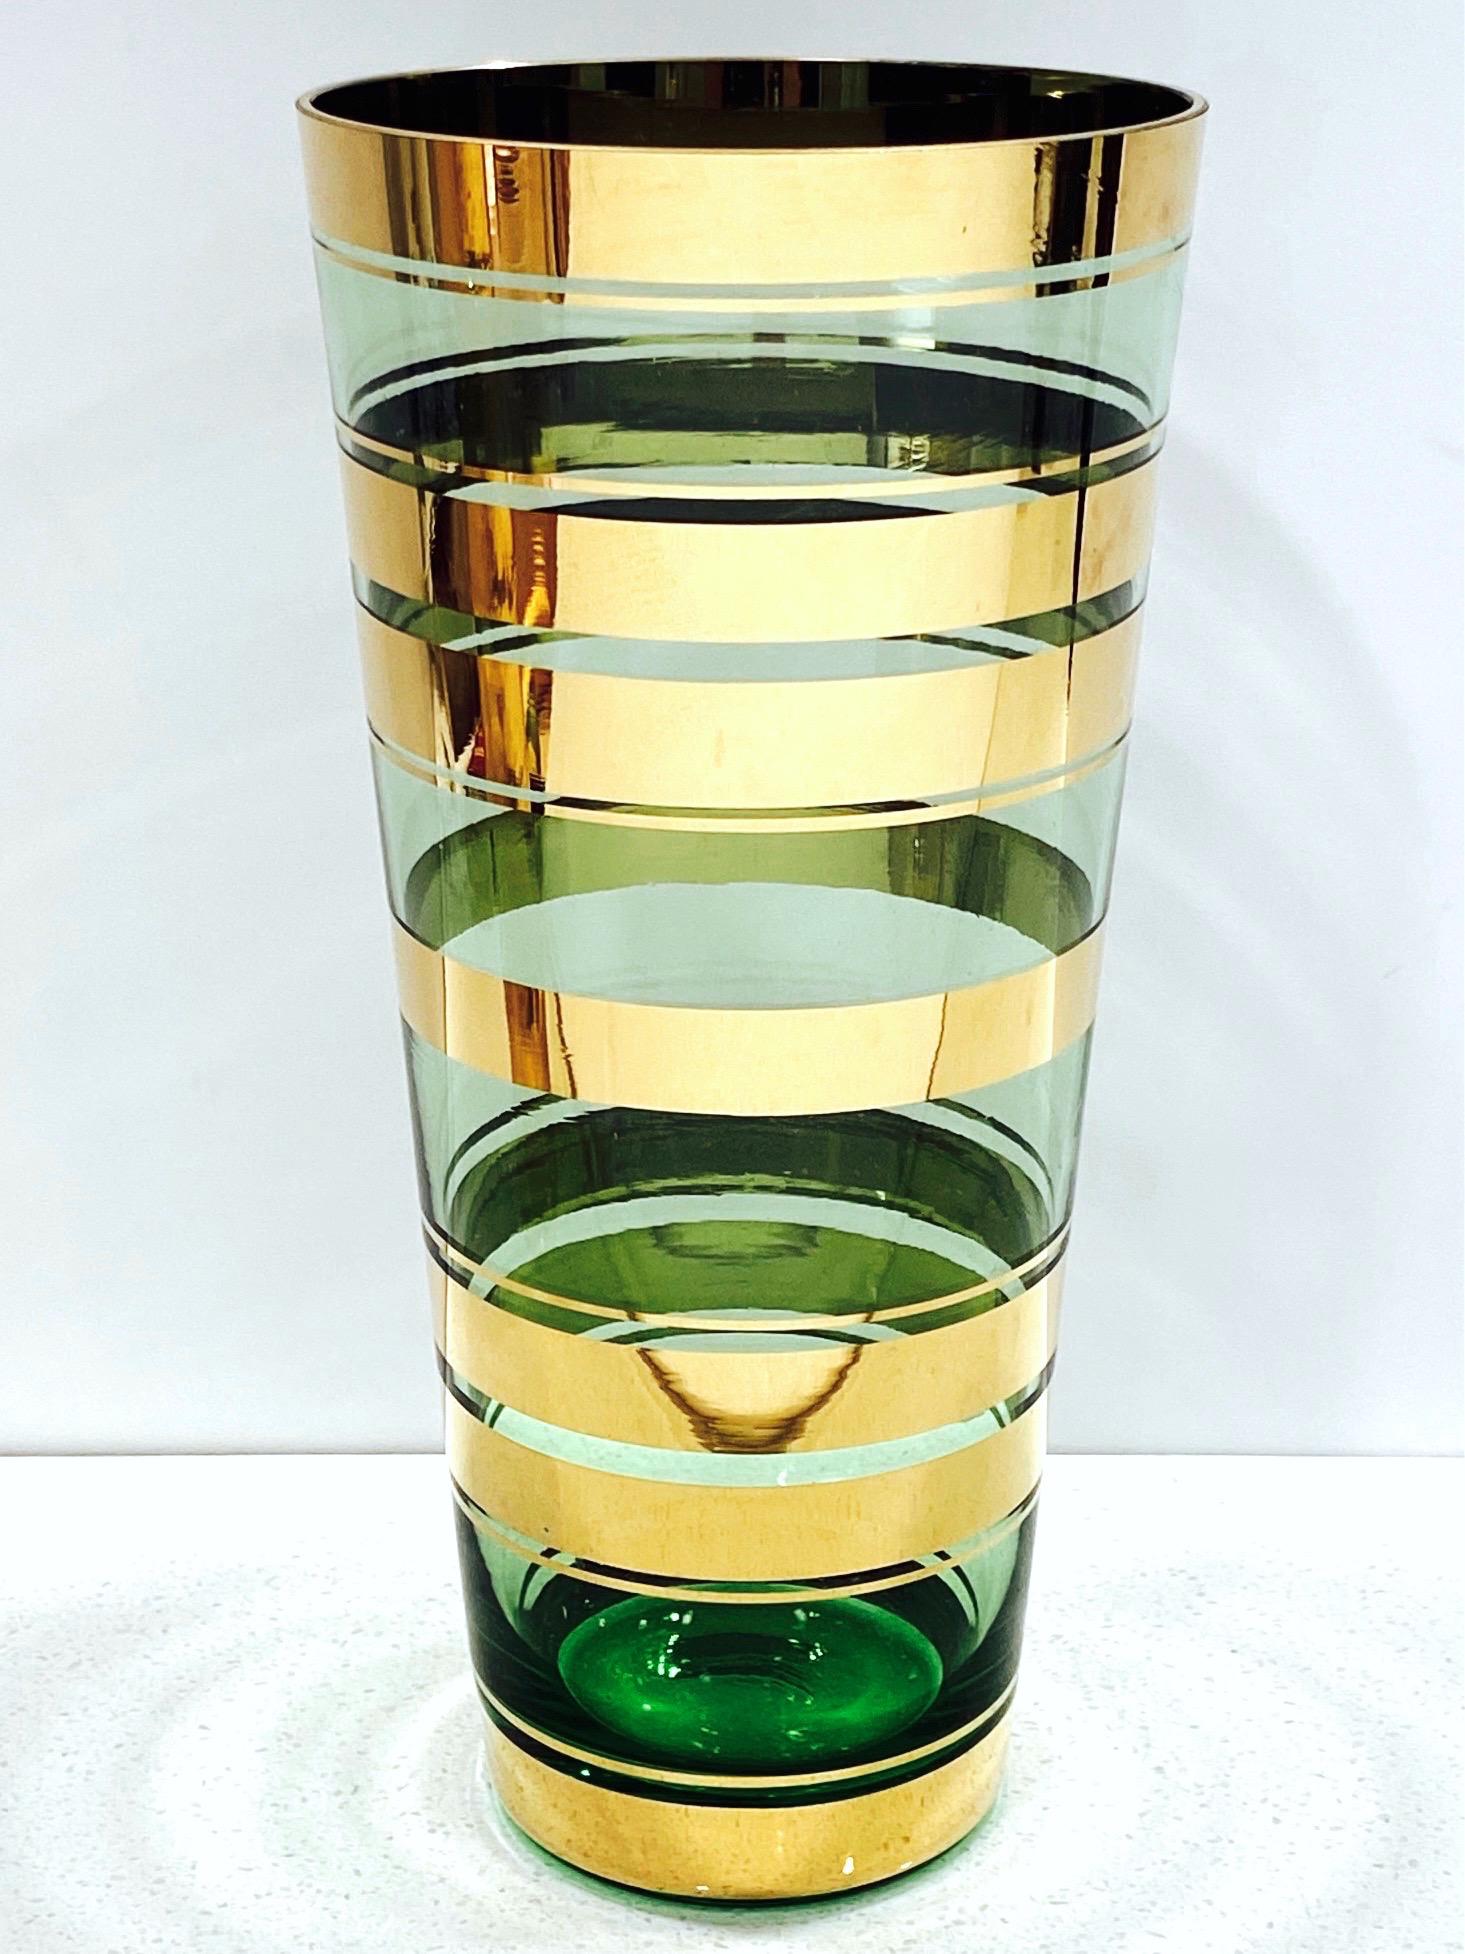 Mid-Century Modern handblown art glass vase with tapered form from the Czech Republic. Features beautiful translucent green glass with 24-karat gold overlays throughout. Functional vase or as decorative item.